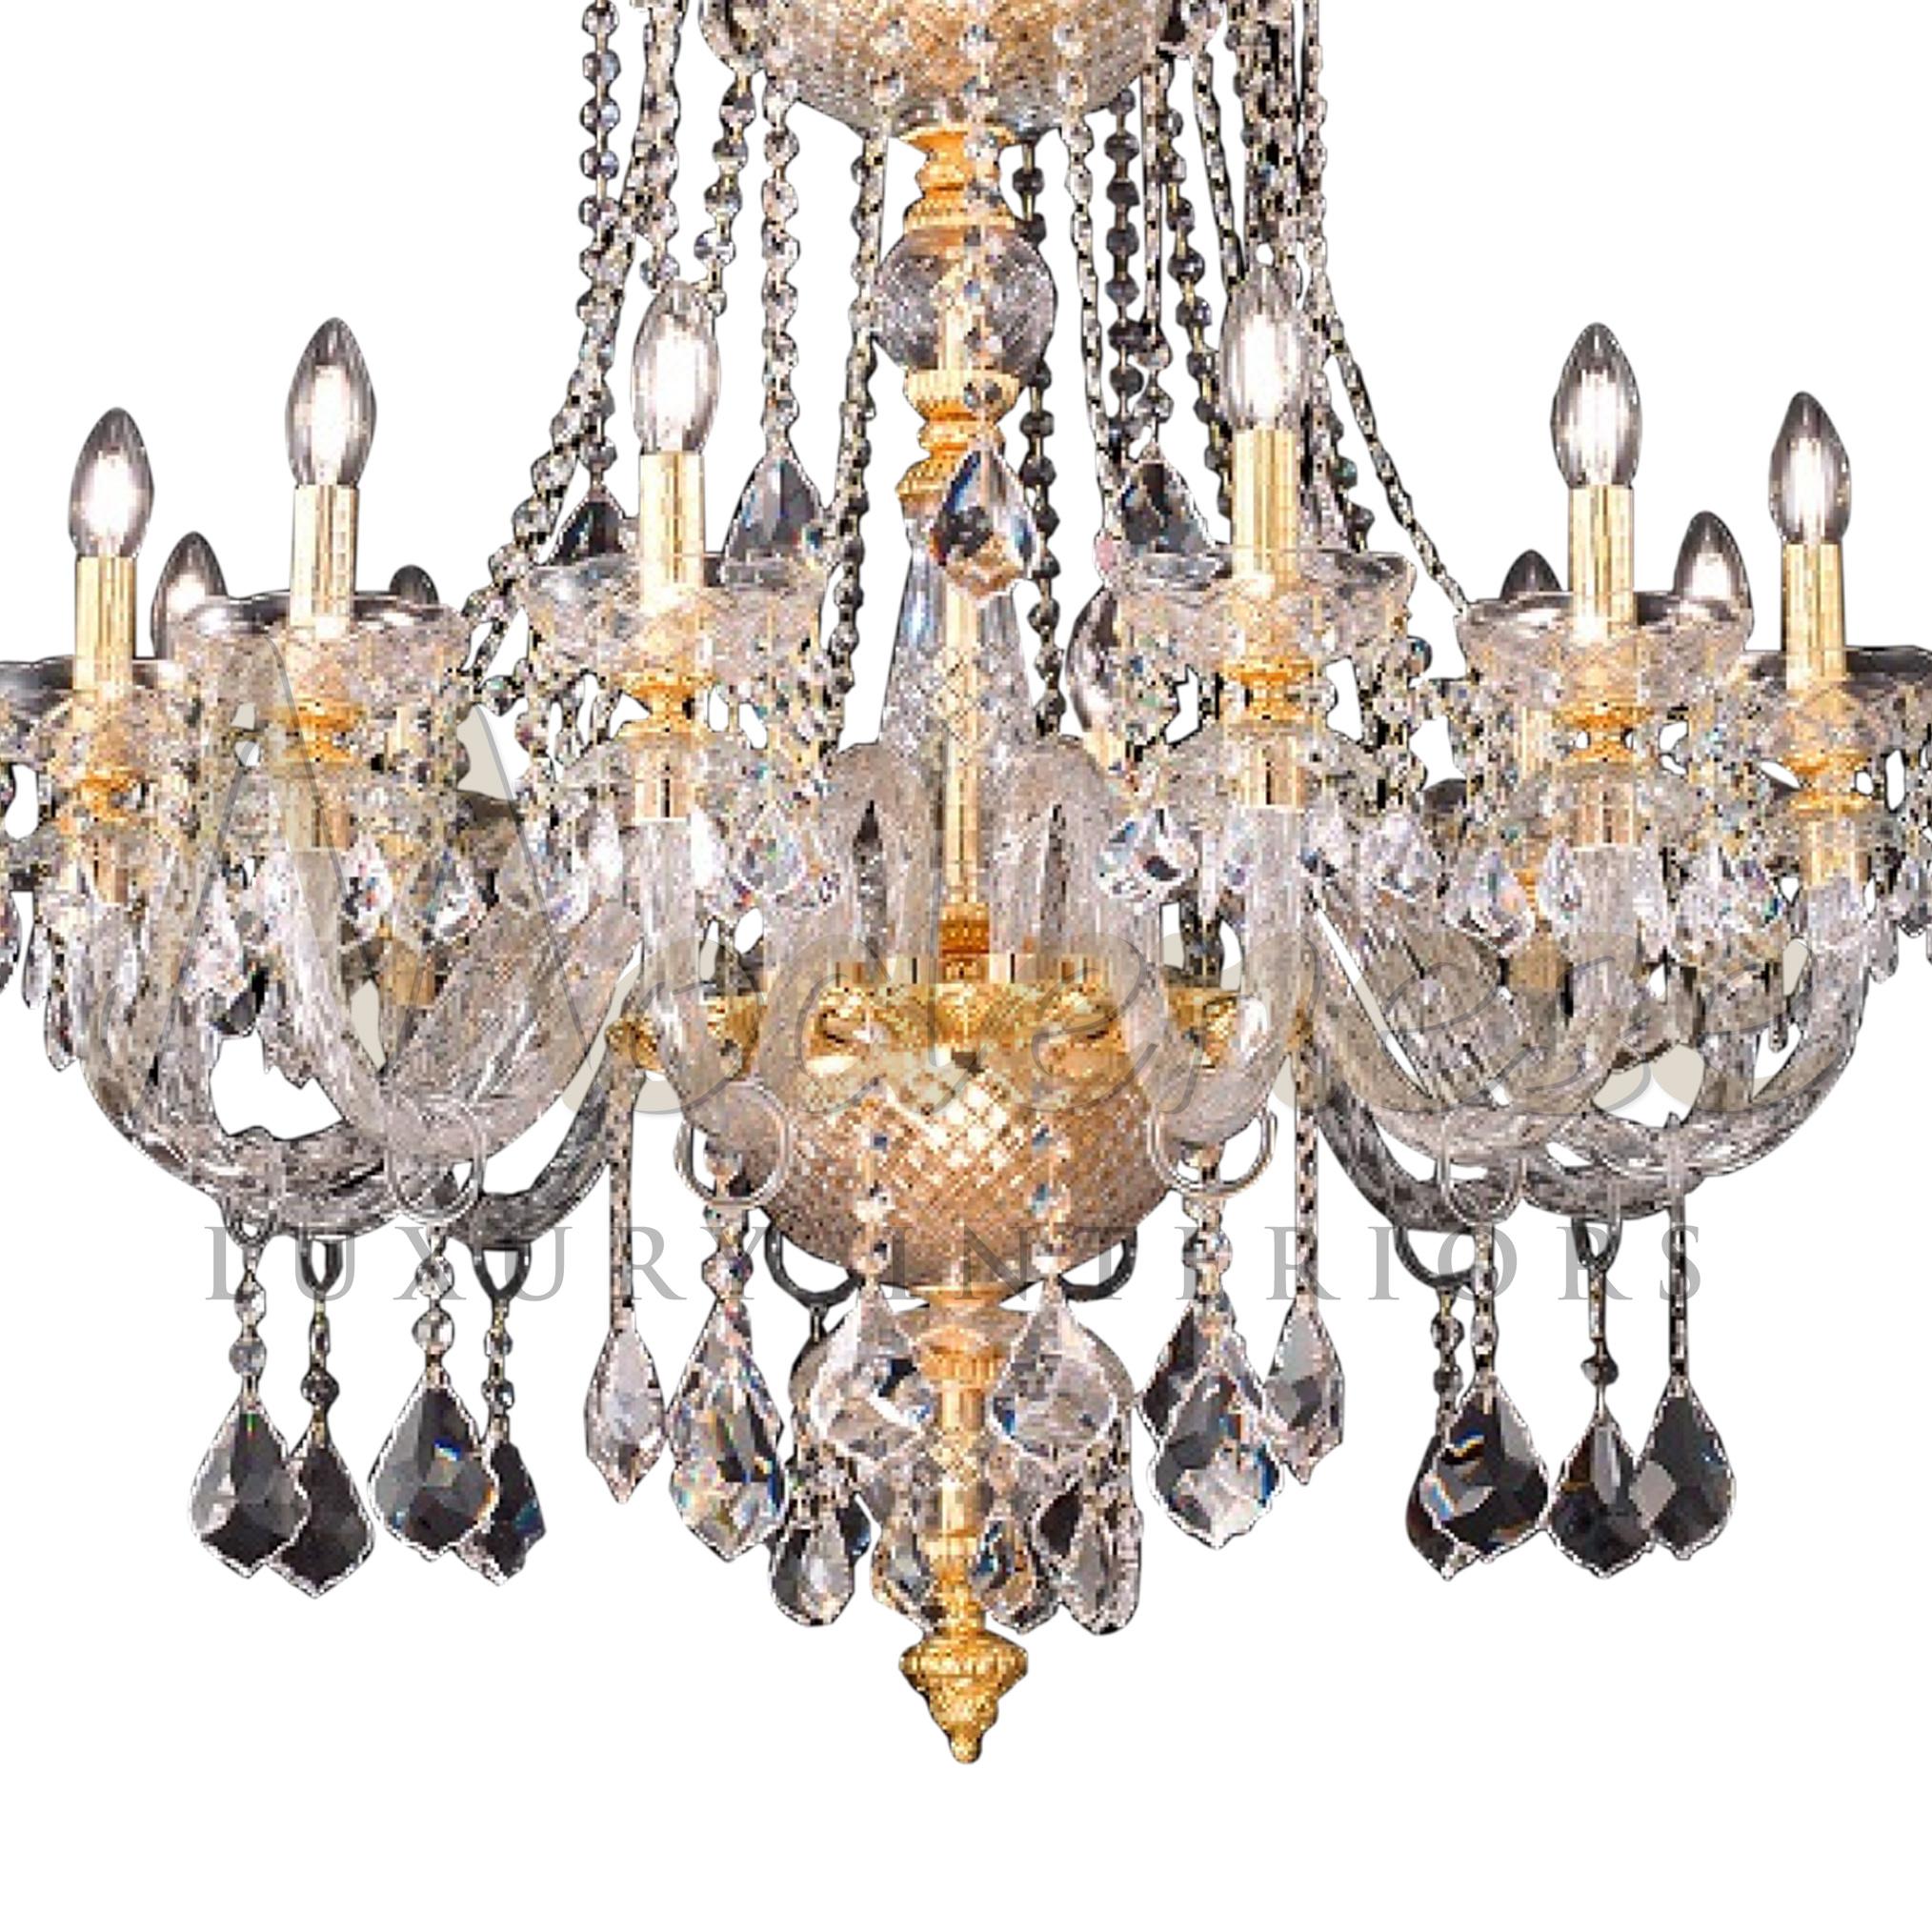 This palace style and royal luxury chandelier from this collection will not leave anyone indifferent. The harmony of proportions, the gold and scholer crystals will give the room refinement and respectable luxury. This model requires 12 single E14